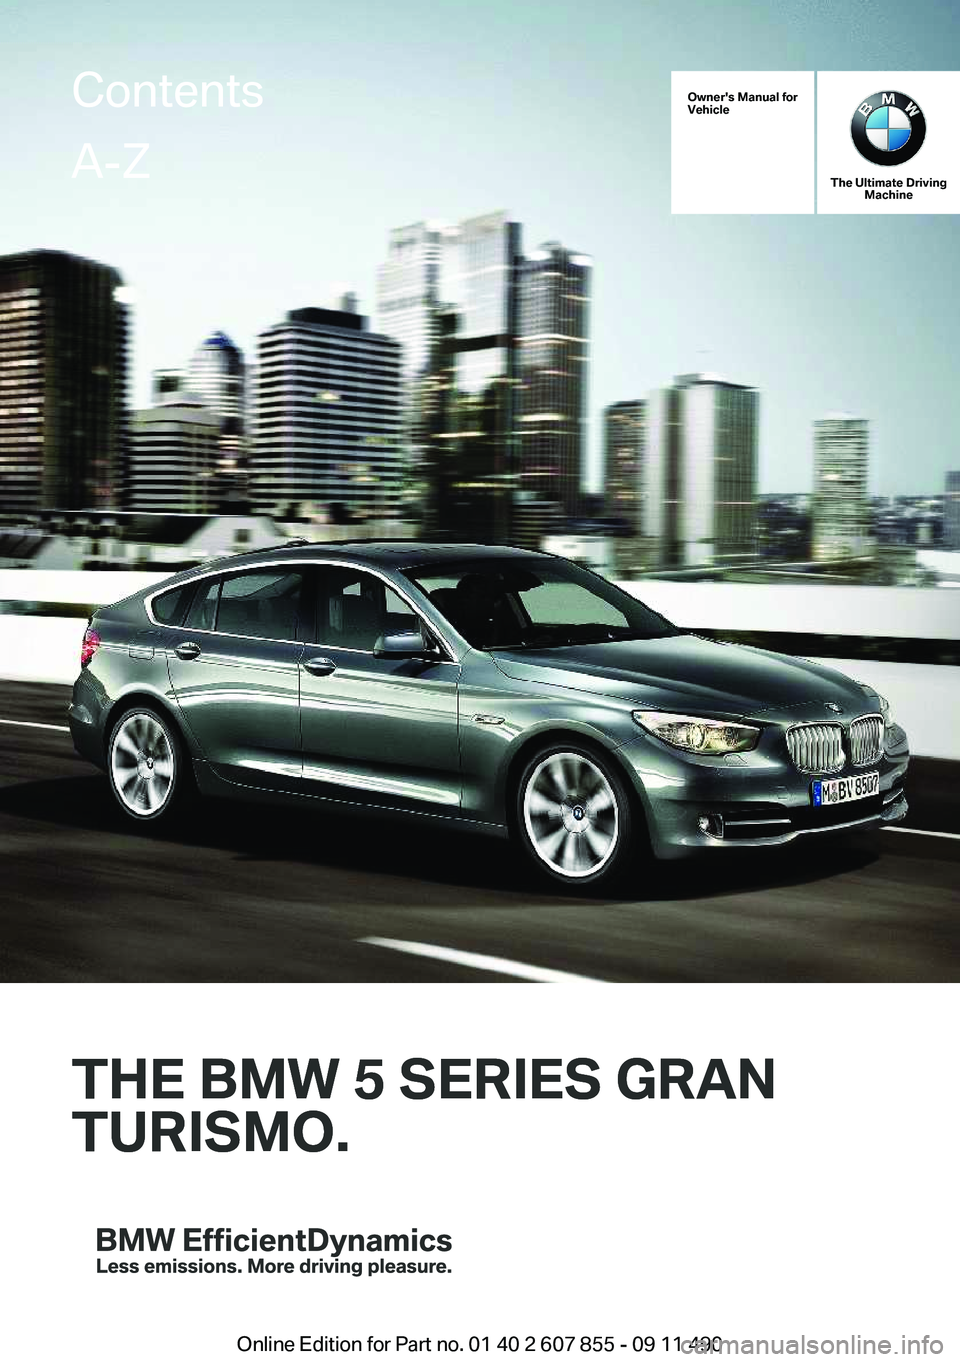 BMW 535I GRAN TURISMO 2012  Owners Manual Owner's Manual for
Vehicle
THE BMW 5 SERIES GRAN
TURISMO.
The Ultimate Driving Machine
THE BMW 5 SERIES GRAN
TURISMO.
ContentsA-Z
Online Edition for Part no. 01 40 2 607 855 - 09 11 490   